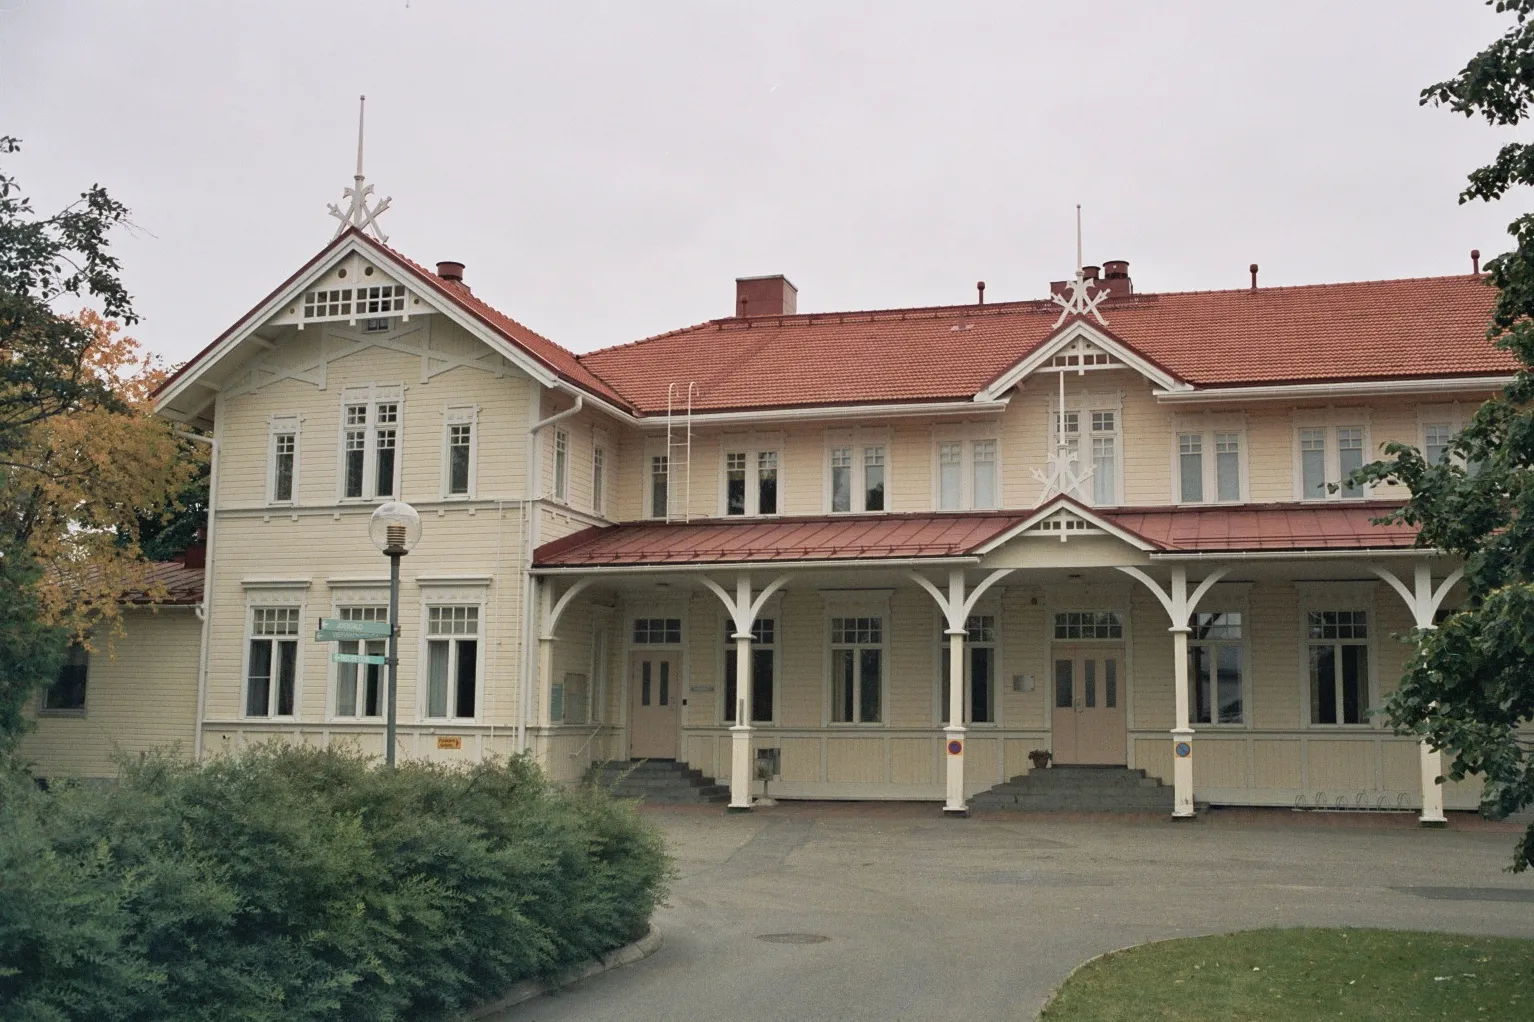 Photo showing: Niilontalo, built in 1904, one of the buildings of the Peräpohjola Institute in the Kiviranta district of Tornio, Finland.